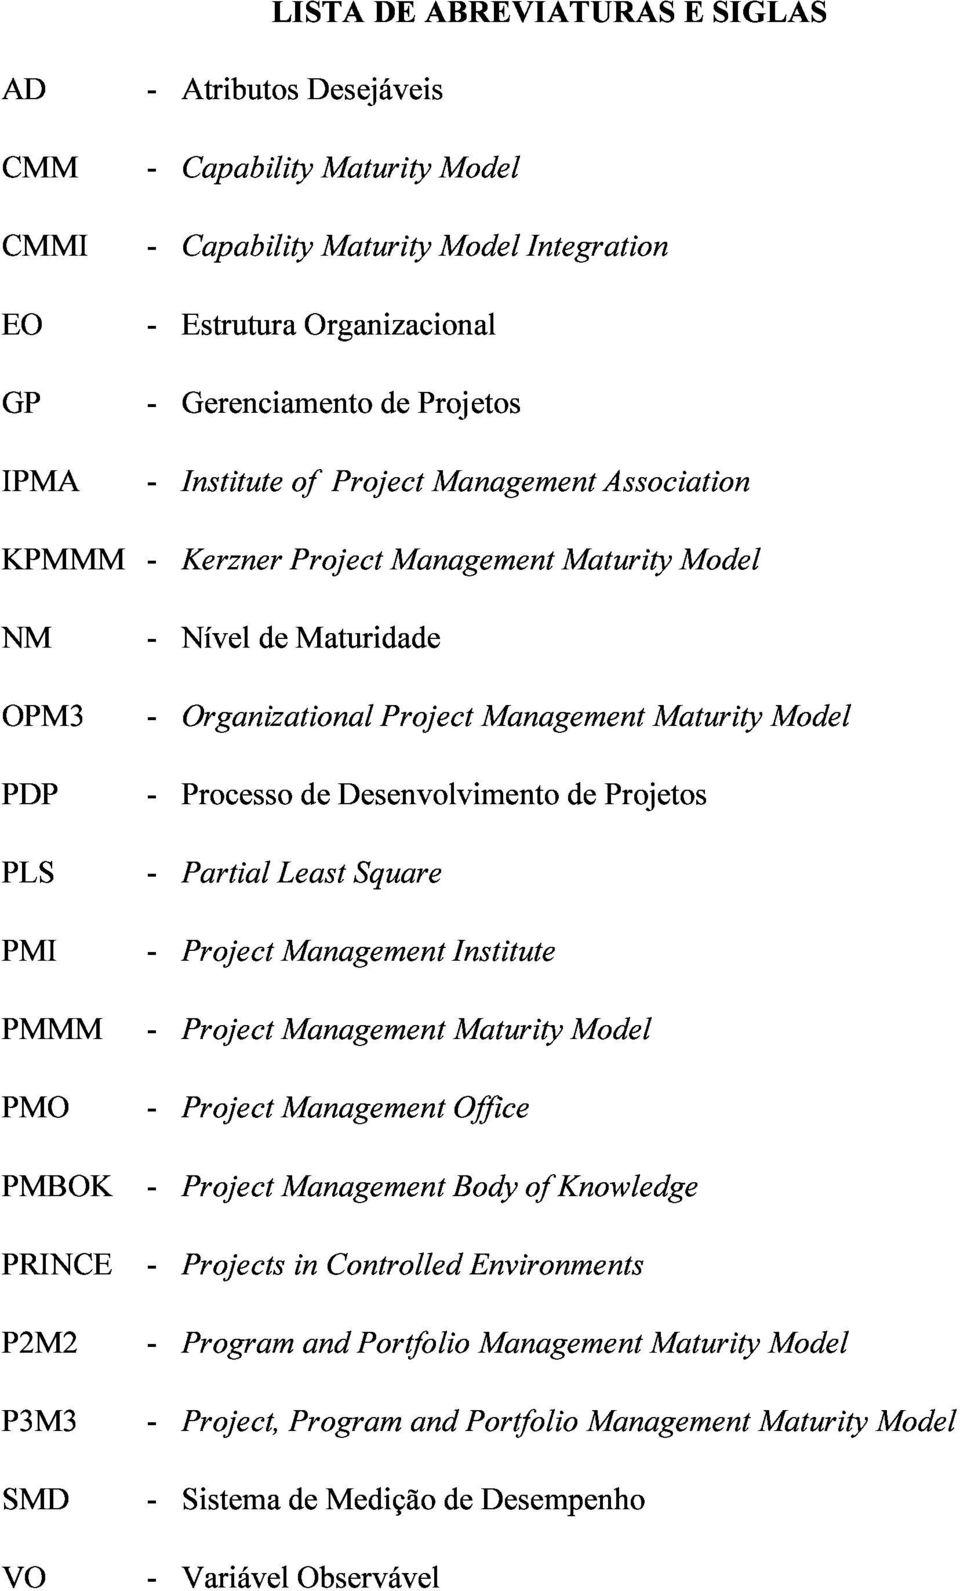 de Projetos Maturity Model PLS PMI Partial Least Square PMMM Institute PMO Office Maturity Model PMBOK PRINCE Projects Management in Controlled Body Environments of Knowledge